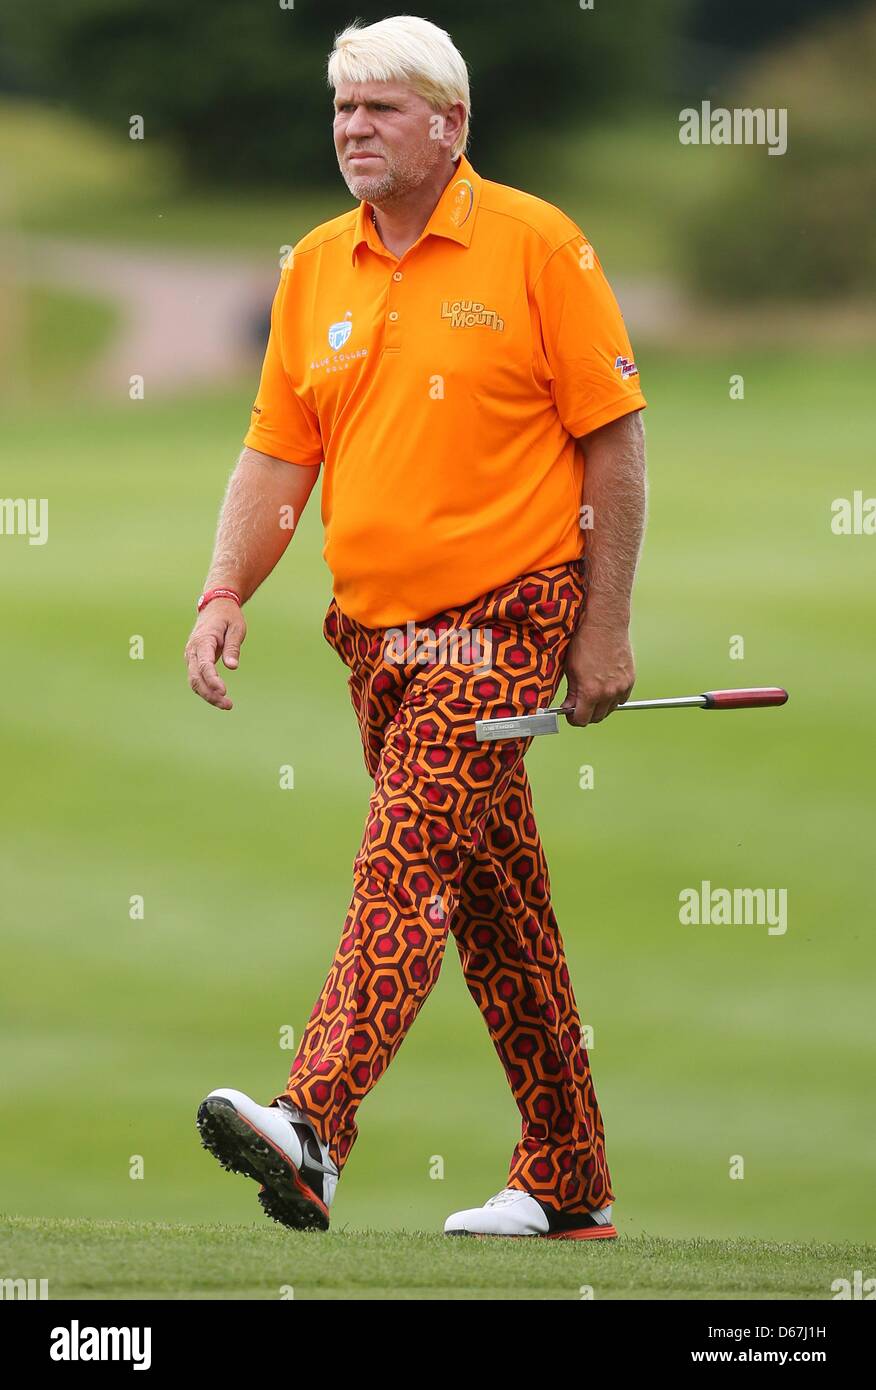 US golfer John Daly wears extravagant trousers during the International open at golf club Gut Laerchenhof in Pulheim near Cologne, Germany, 21 June 2012. World class golfers of the European Tour compete in the tournament from 19 till 24 June 2012. Photo: ROLF VENNENBERND Stock Photo